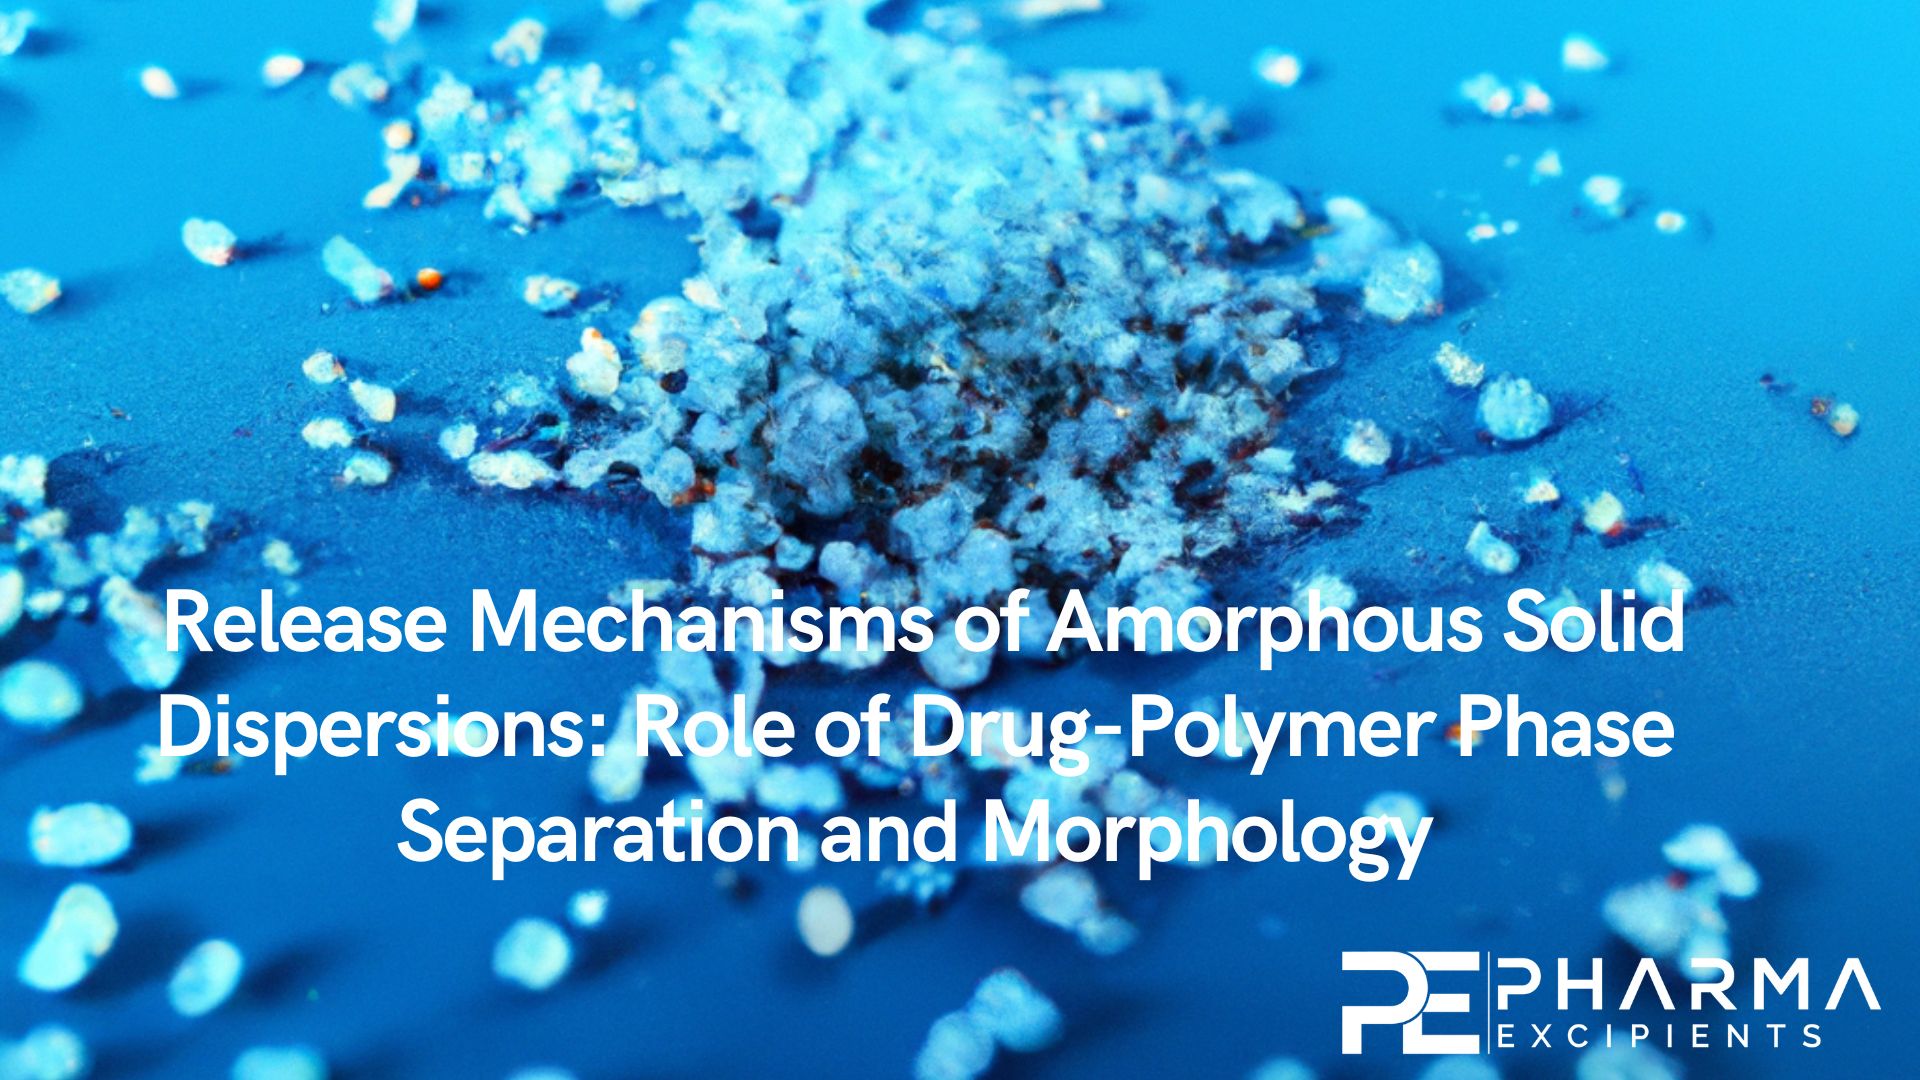 Release Mechanisms of Amorphous Solid Dispersions - Role of Drug-Polymer Phase Separation and Morphology